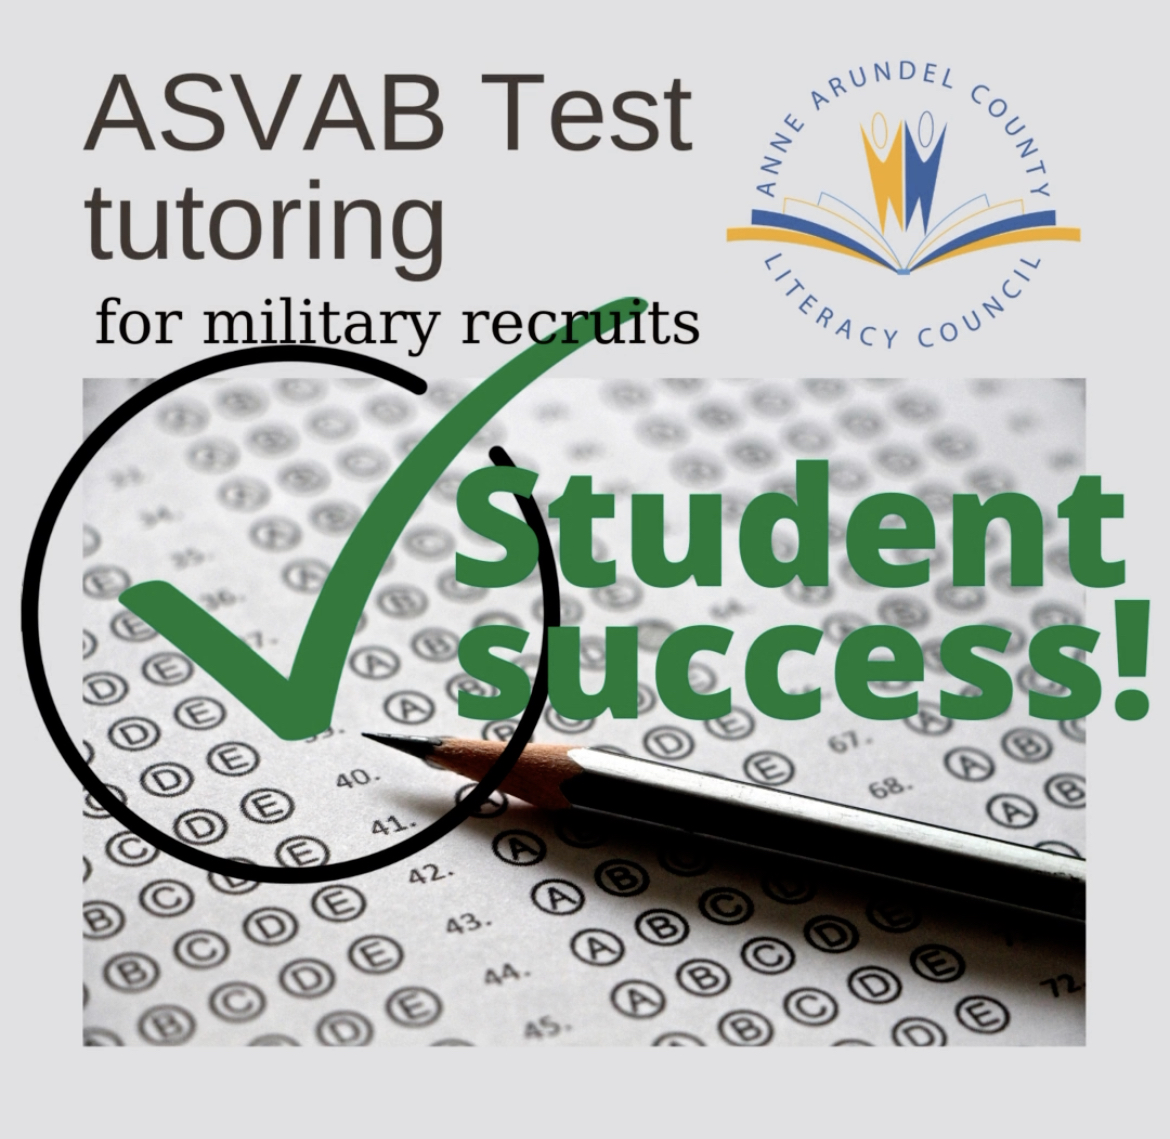 🎉Congratulations to Literacy Council student Usman A. He passed the ASVAB in May. Usman studied hard, meeting with his tutor, Nancy, twice a week. He practiced using Khan Academy, Quizlet, & books he borrowed from the library. Usman is preparing to enlist with the U.S. Army.💯😊